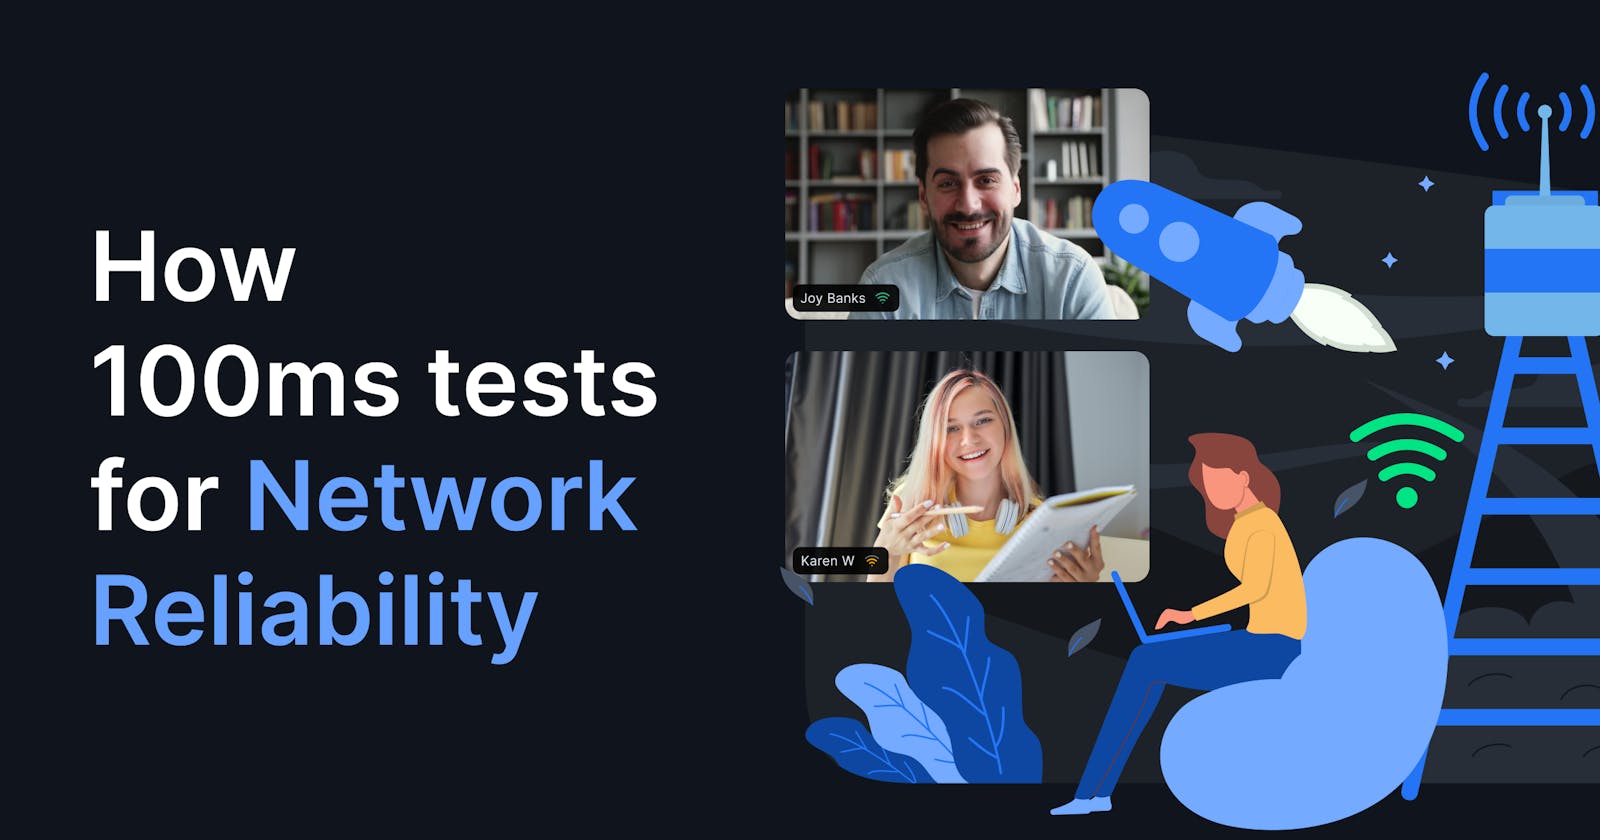 How 100ms tests for Network Reliability